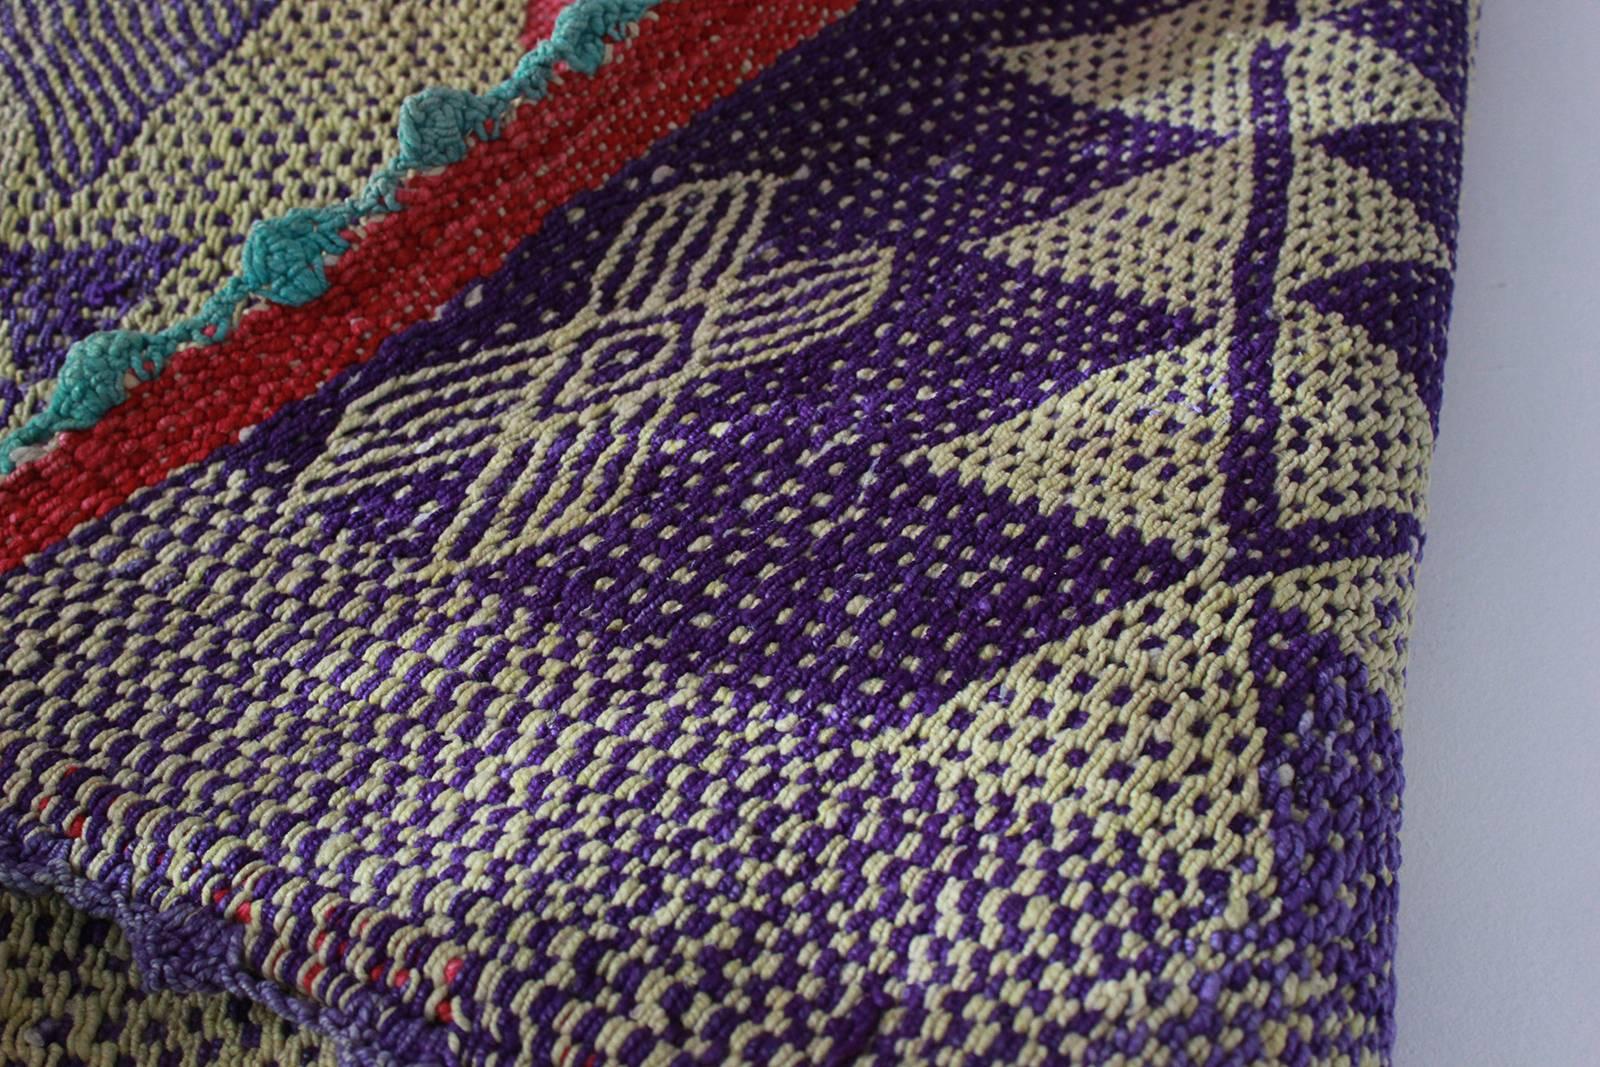 Peruvian handwoven textile with violet geometric details and red border with green accents.